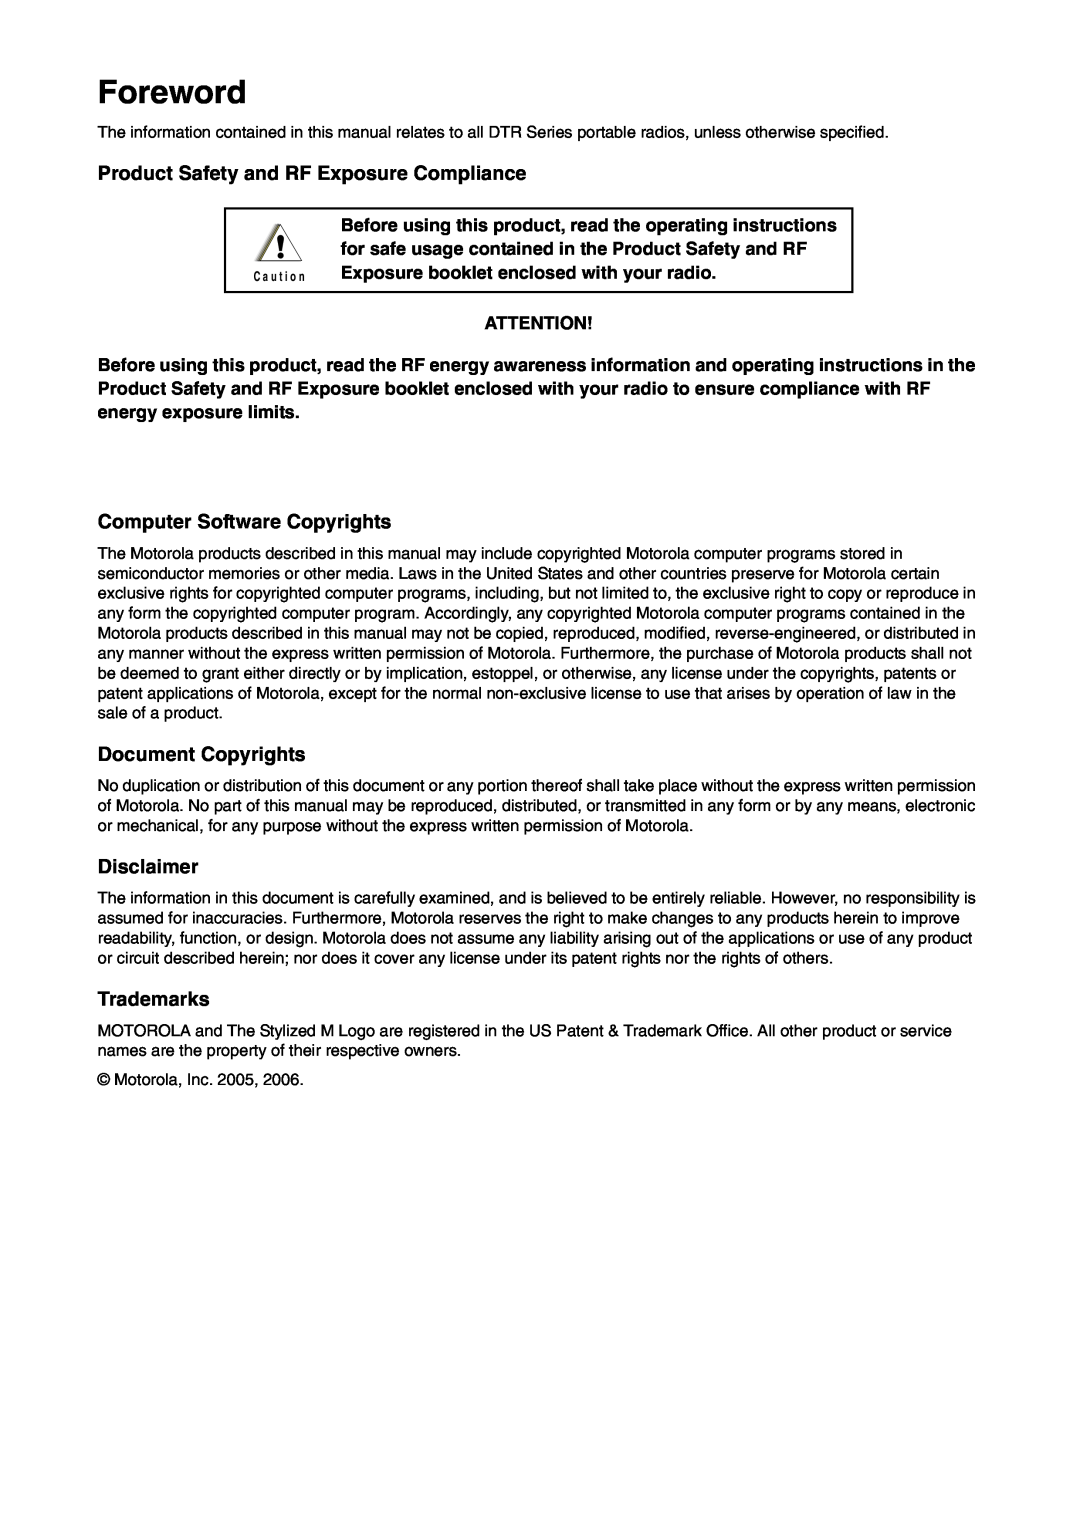 Motorola DTR2450 Foreword, Product Safety and RF Exposure Compliance, Computer Software Copyrights, Document Copyrights 